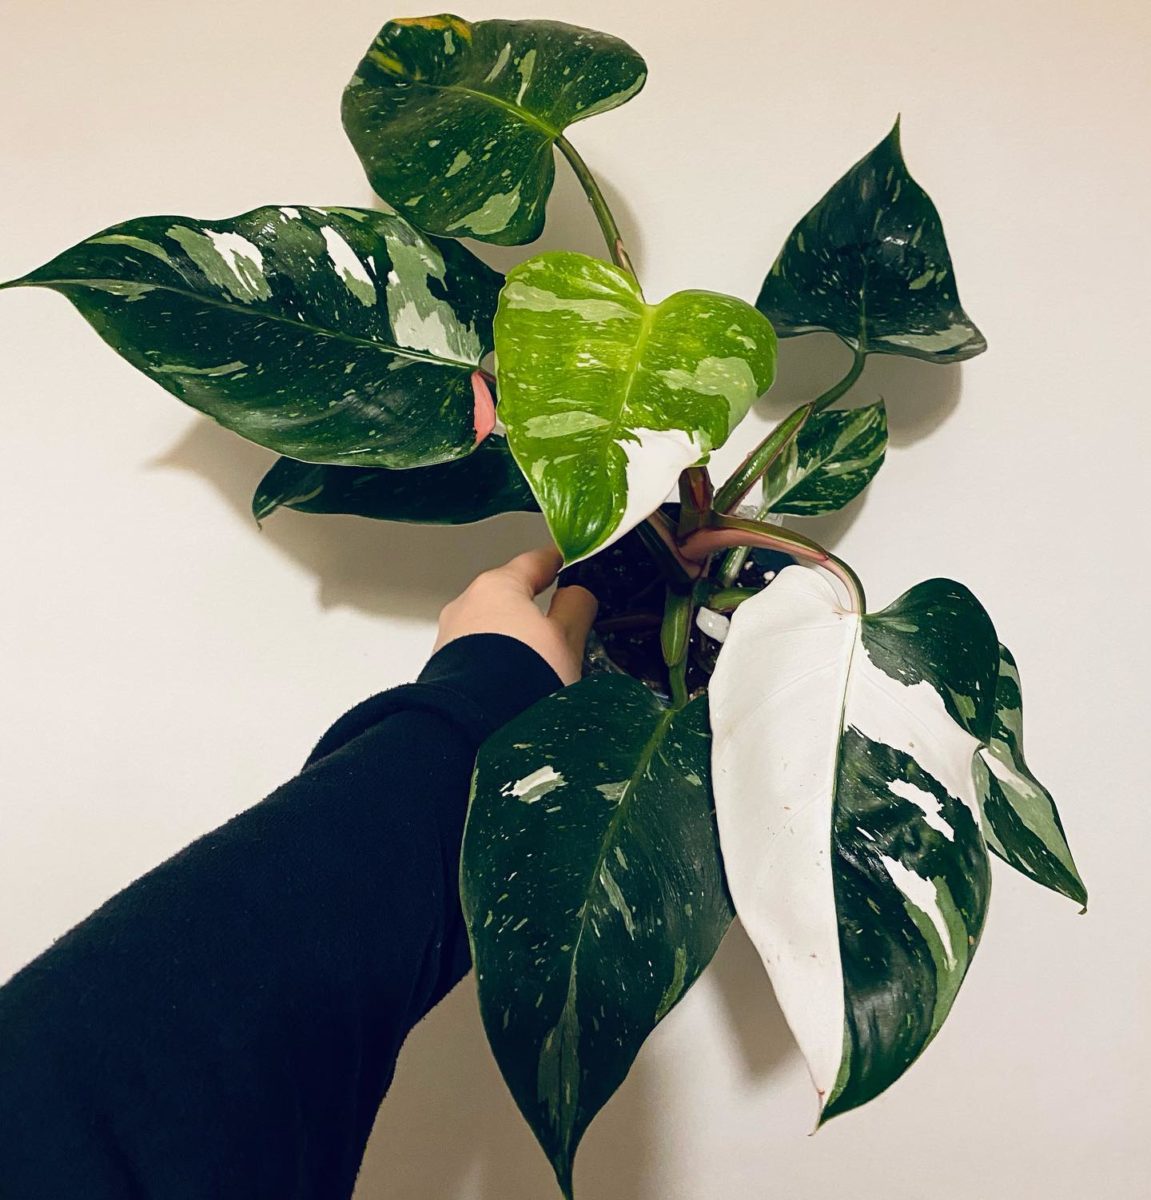 rare houseplants plant-lovers can't wait to get their hands on